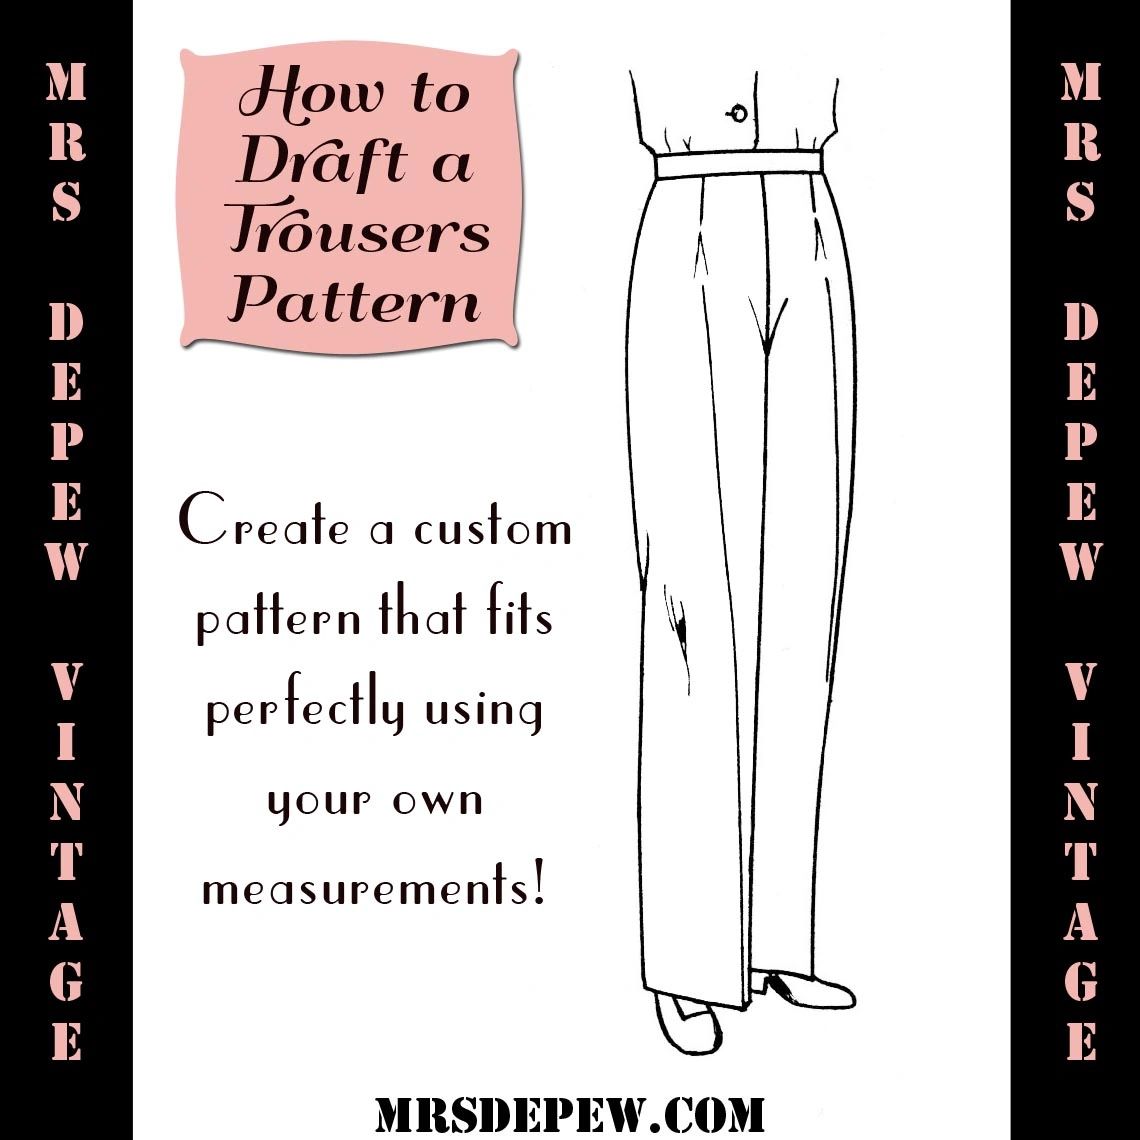 Sewing Pattern Drafting E-book How to Draft a Trousers Pattern